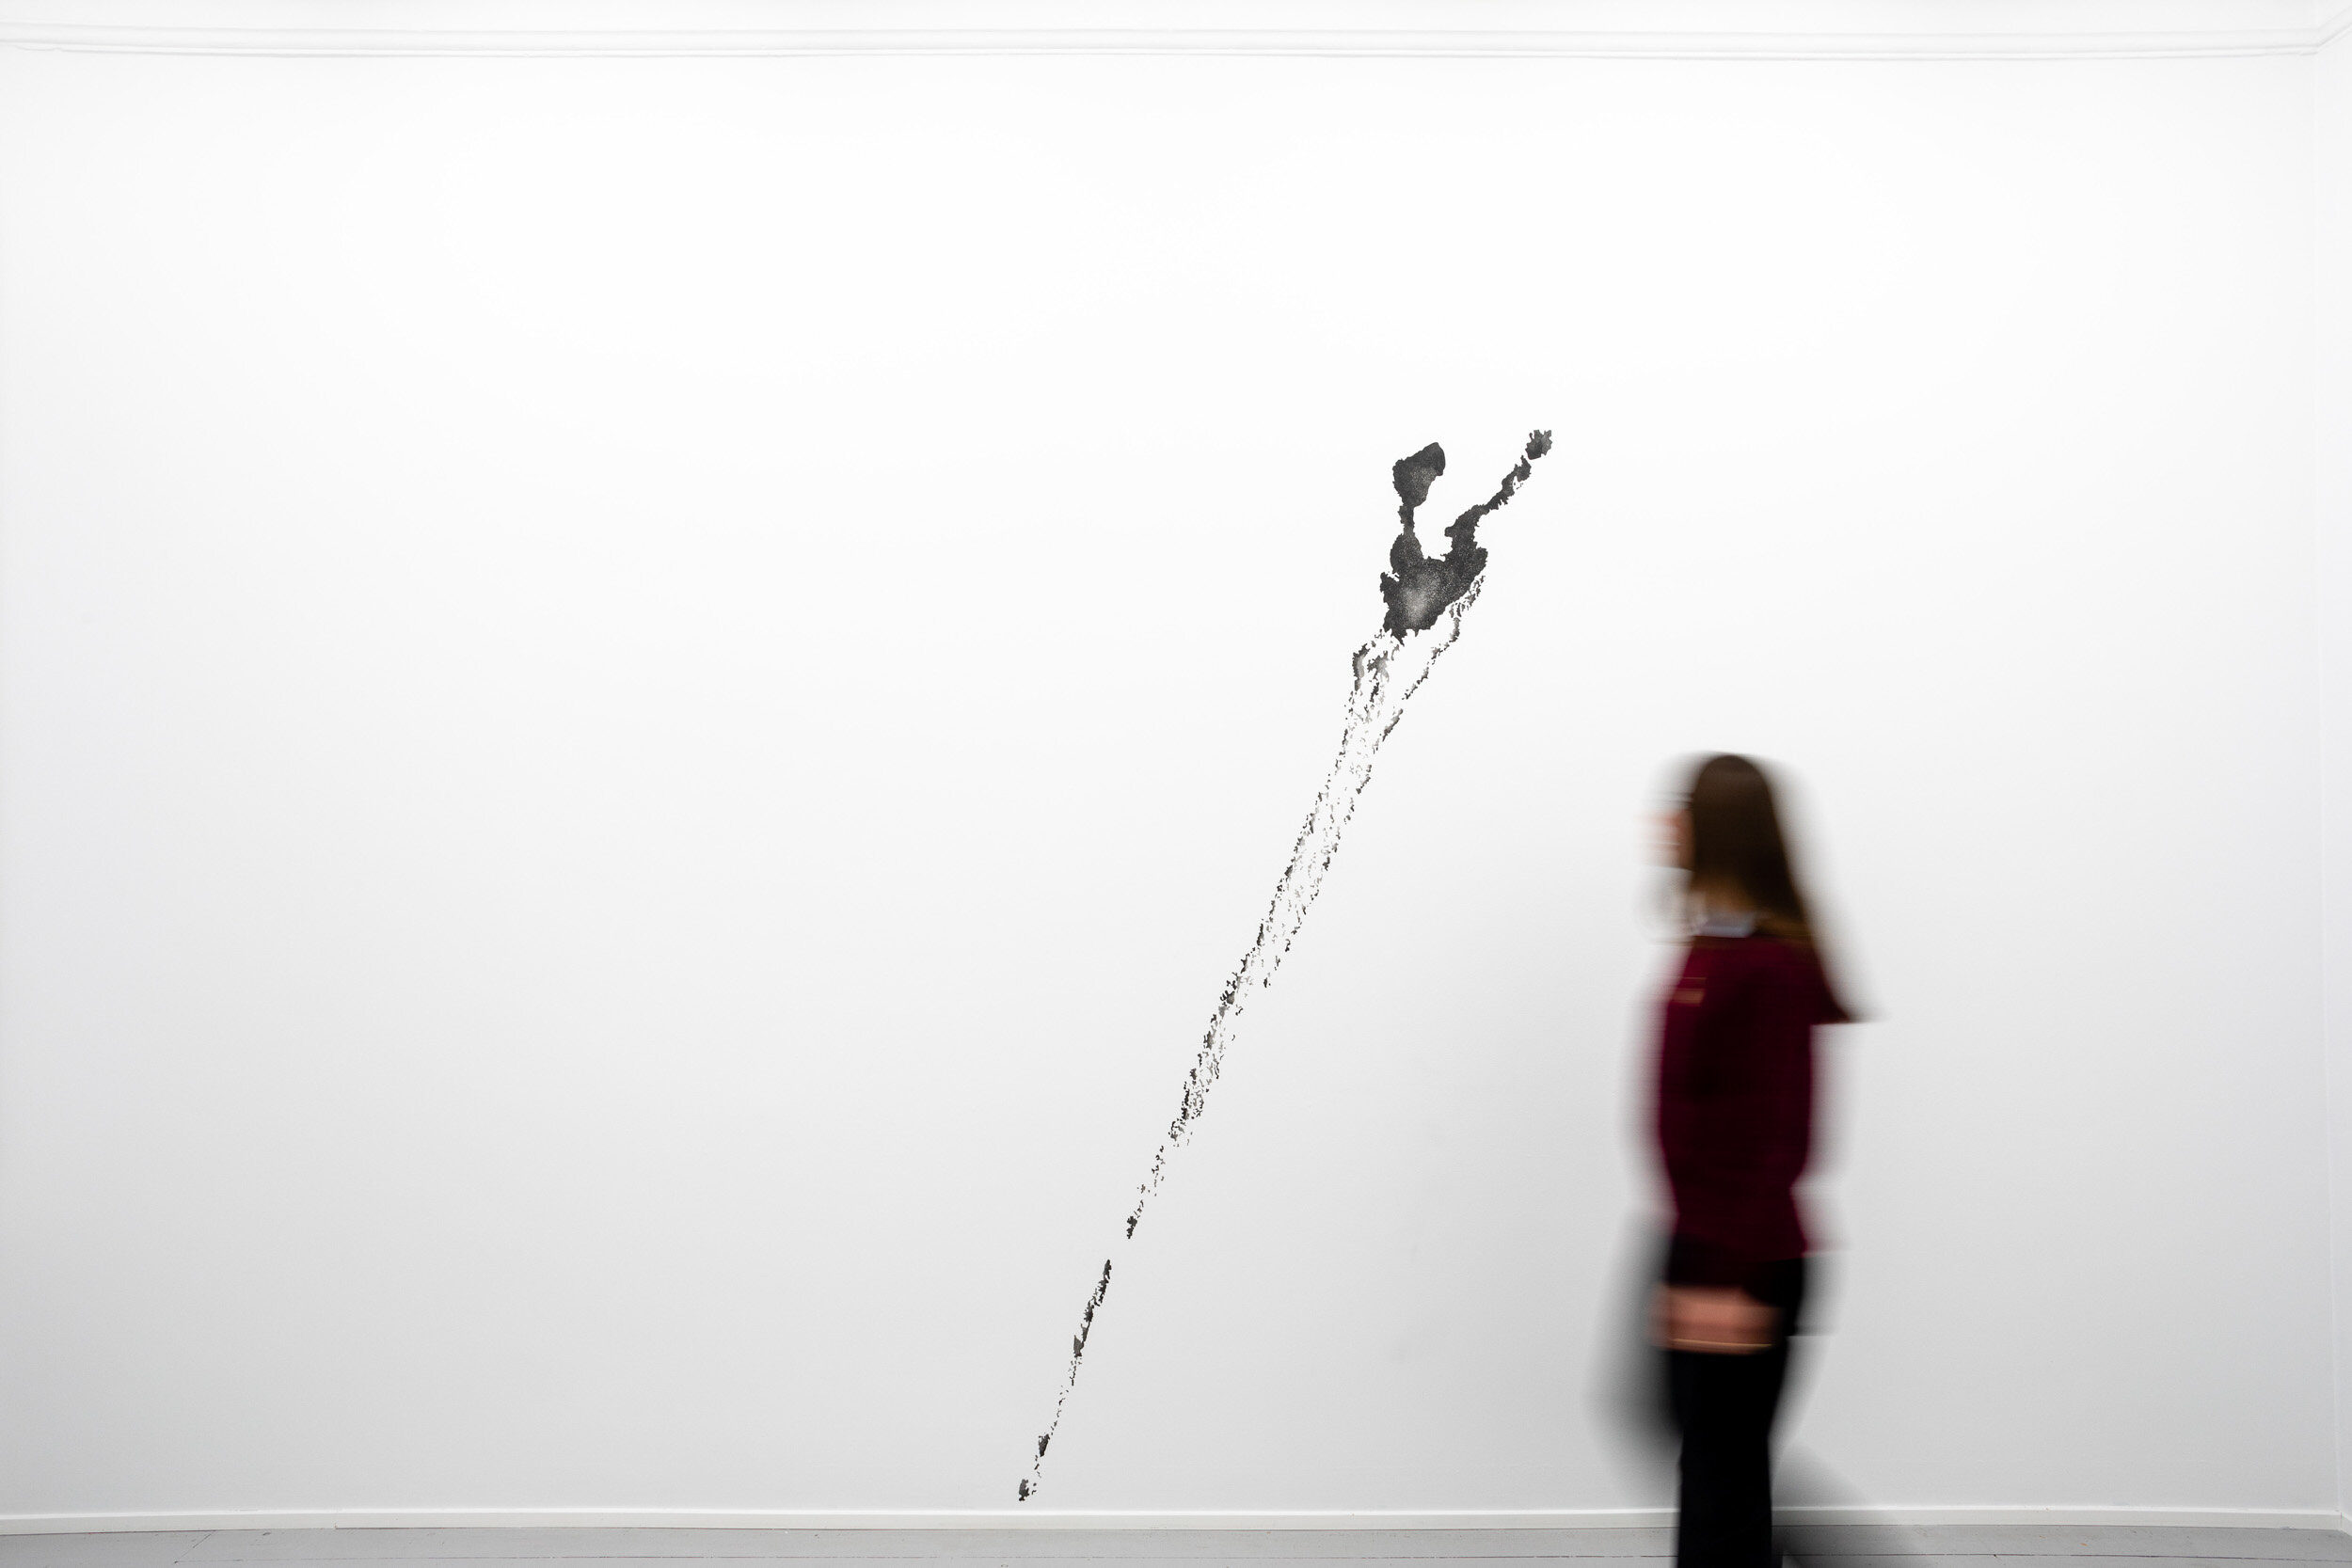  Wall Drawing for Galleri Riis IV, 2019. Crayon on wall, W 517 x H 334 cm. Unique. Installation view Jan Groth ‘Signs and Figures’, Galleri Riis, Oslo 2019. Photo: Adrian Bugge 